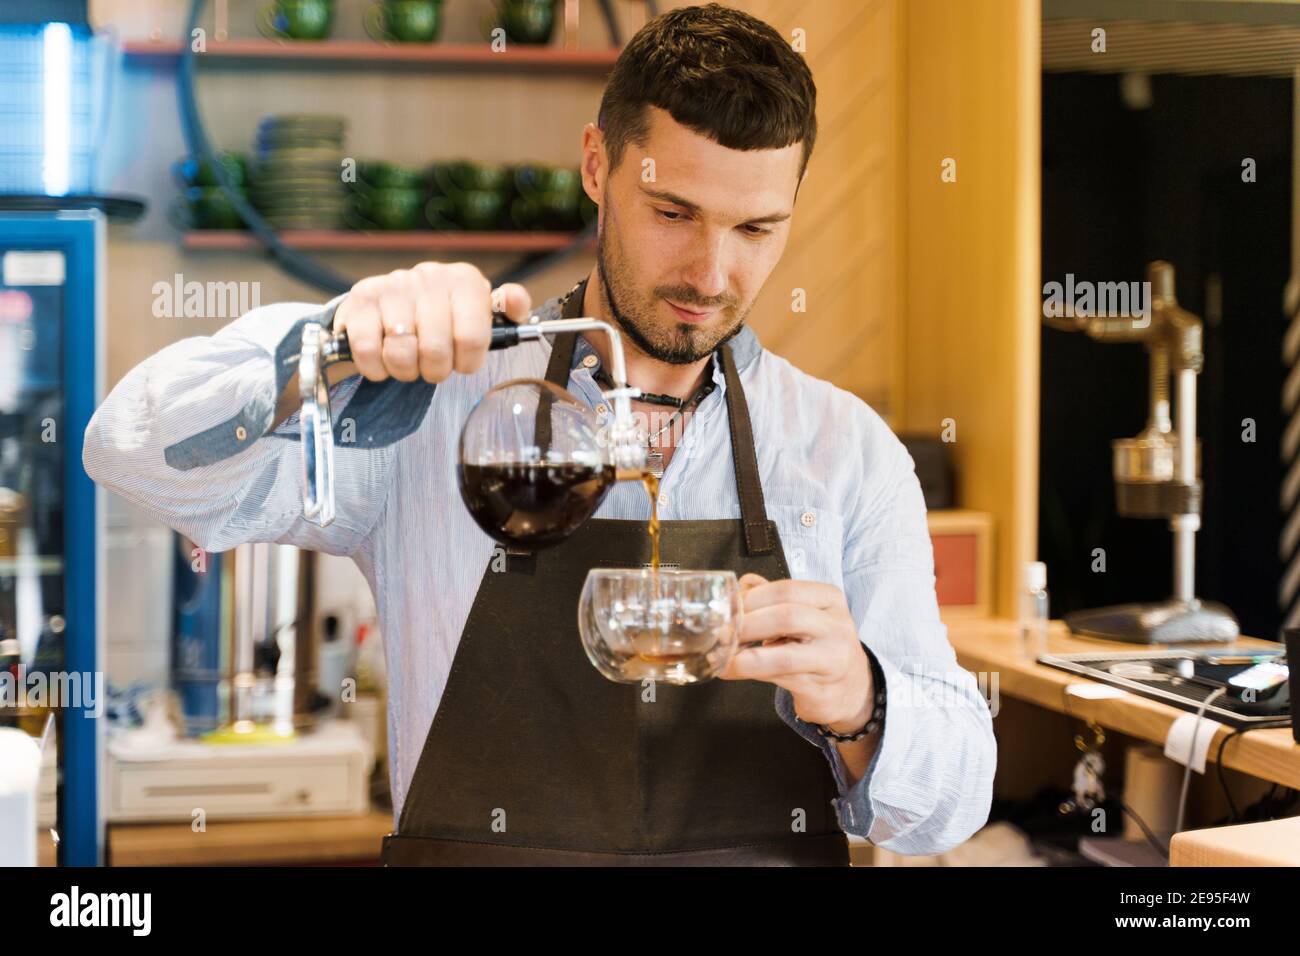 Syphon alternative method of making coffee. Barista pours hot coffee in syphon device for customers. Coffee brewing in cafe. Scandinavian method of co Stock Photo